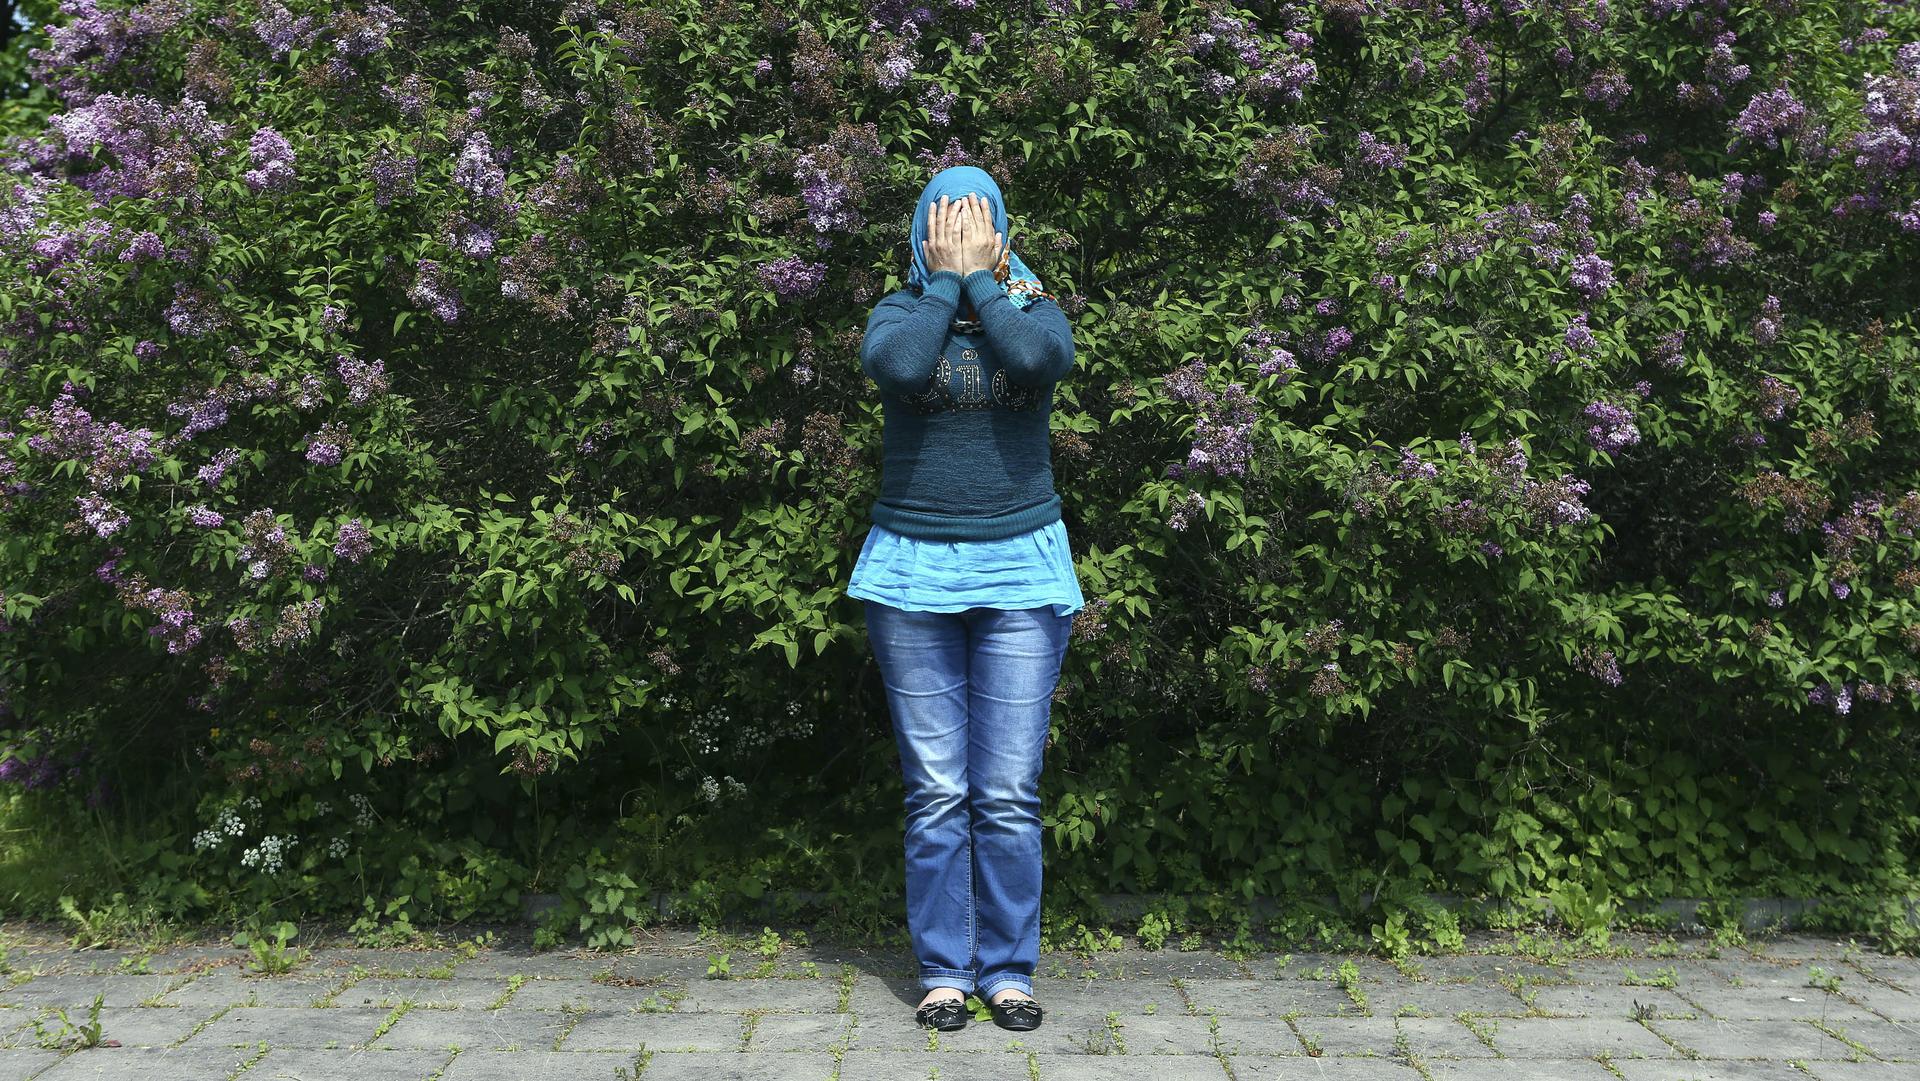 A Syrian refugee covers her face to hide her identity as she poses for a photograph at an asylum camp outside Stockholm, June 8, 2014.